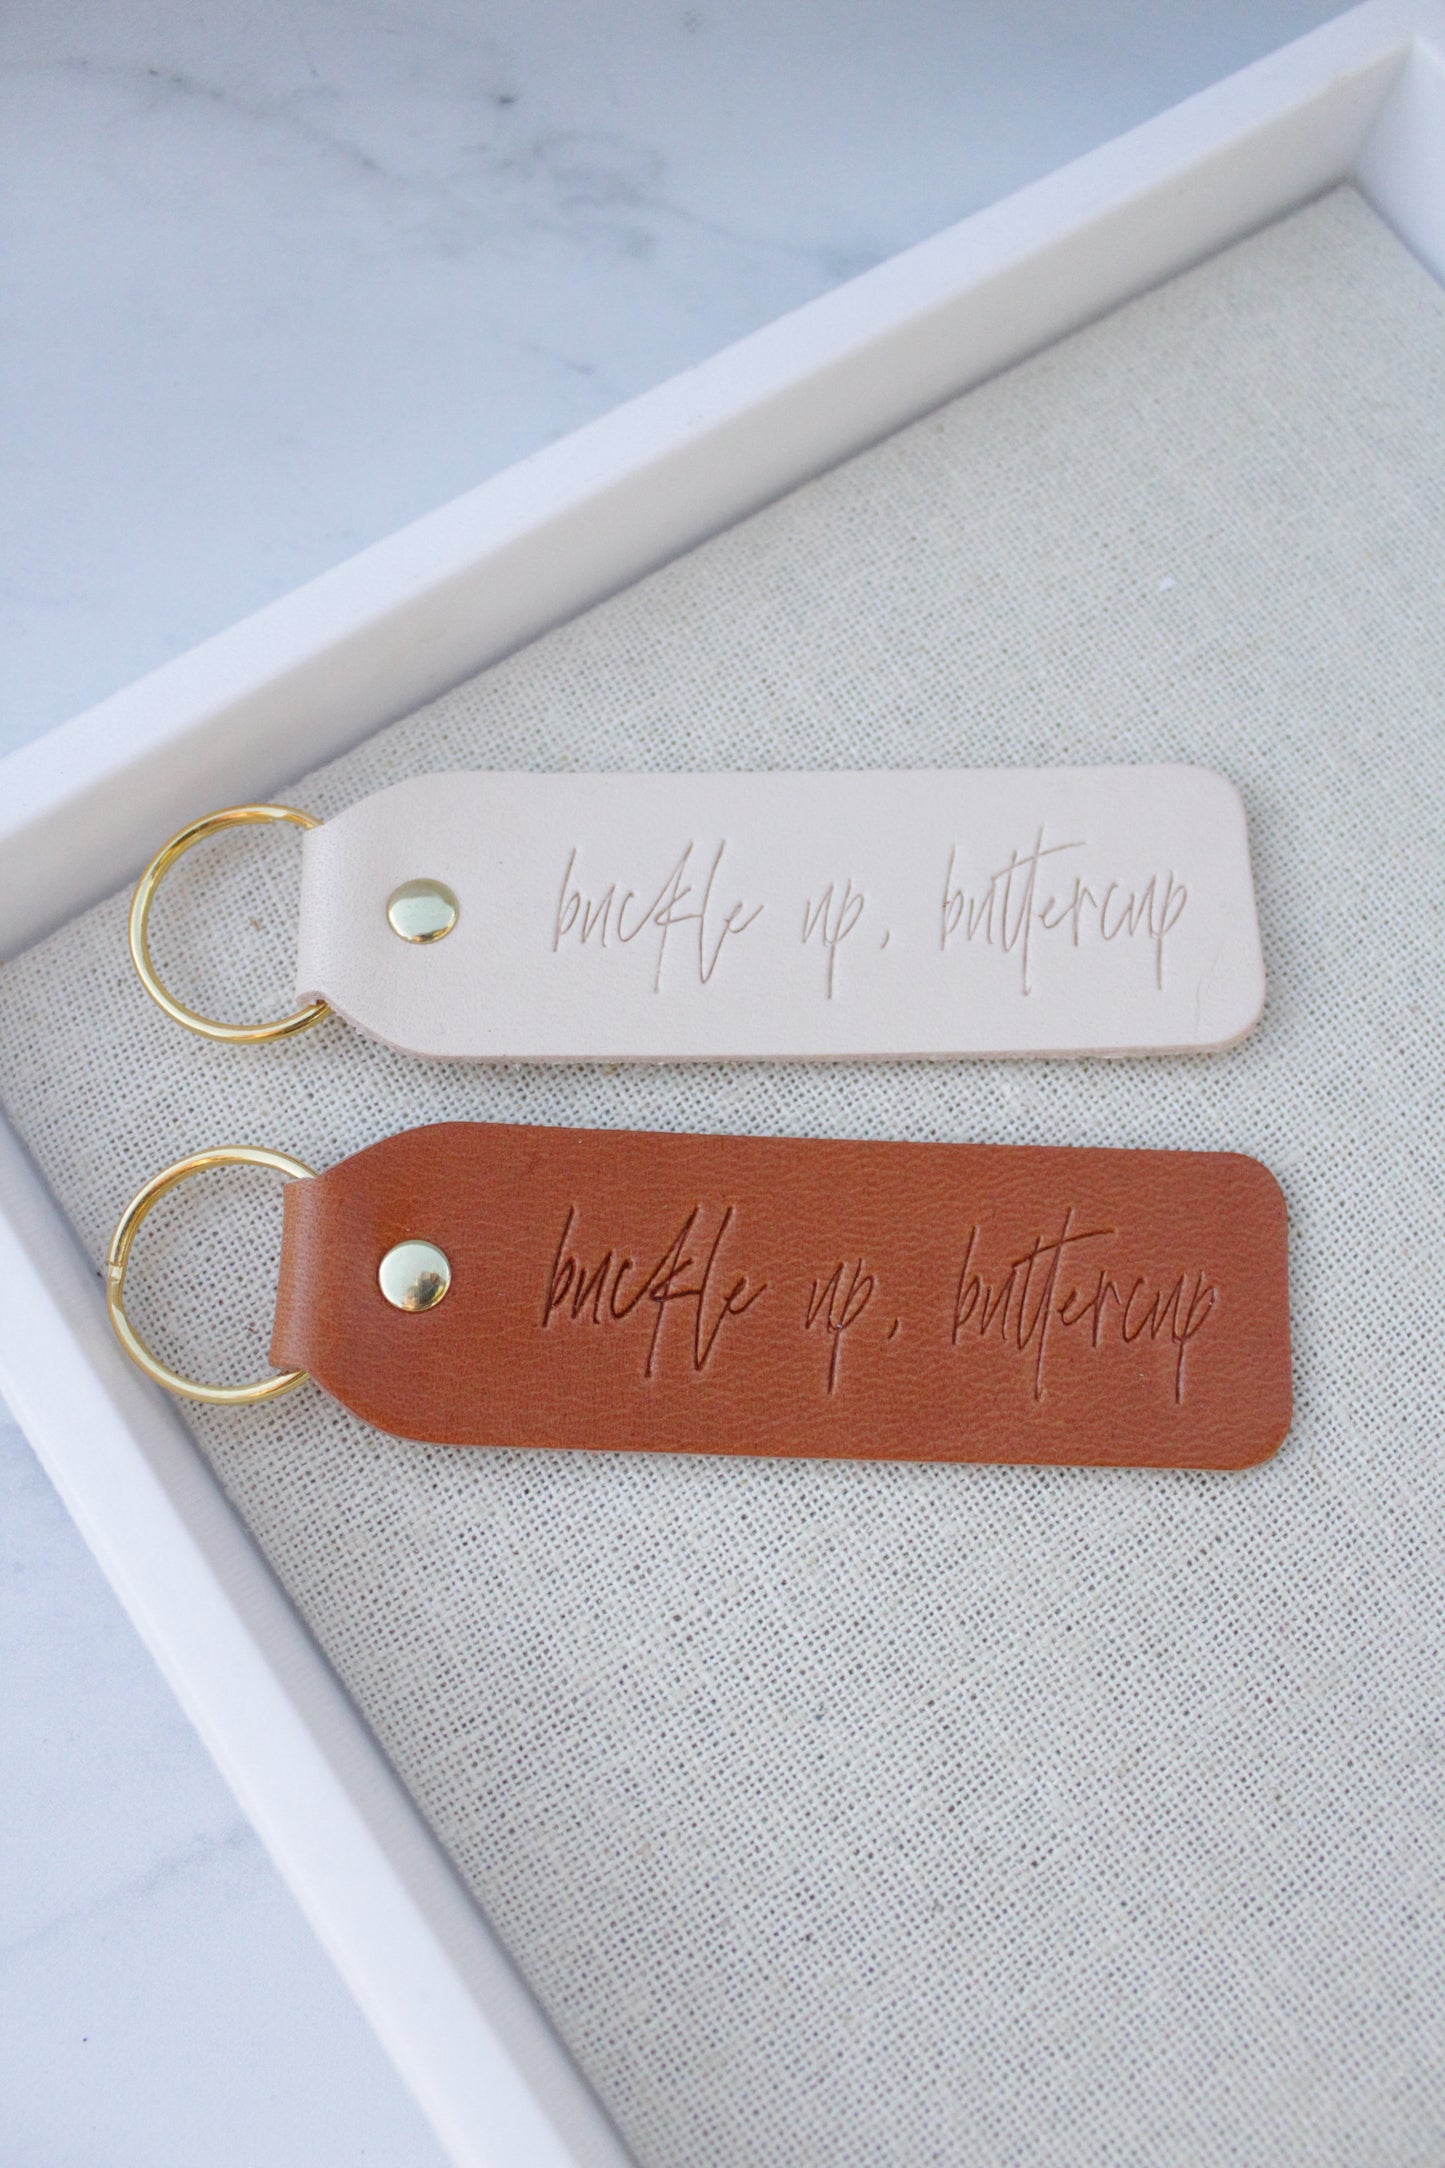 Buckle Up Buttercup Leather Keychain - Multiple Variations Available